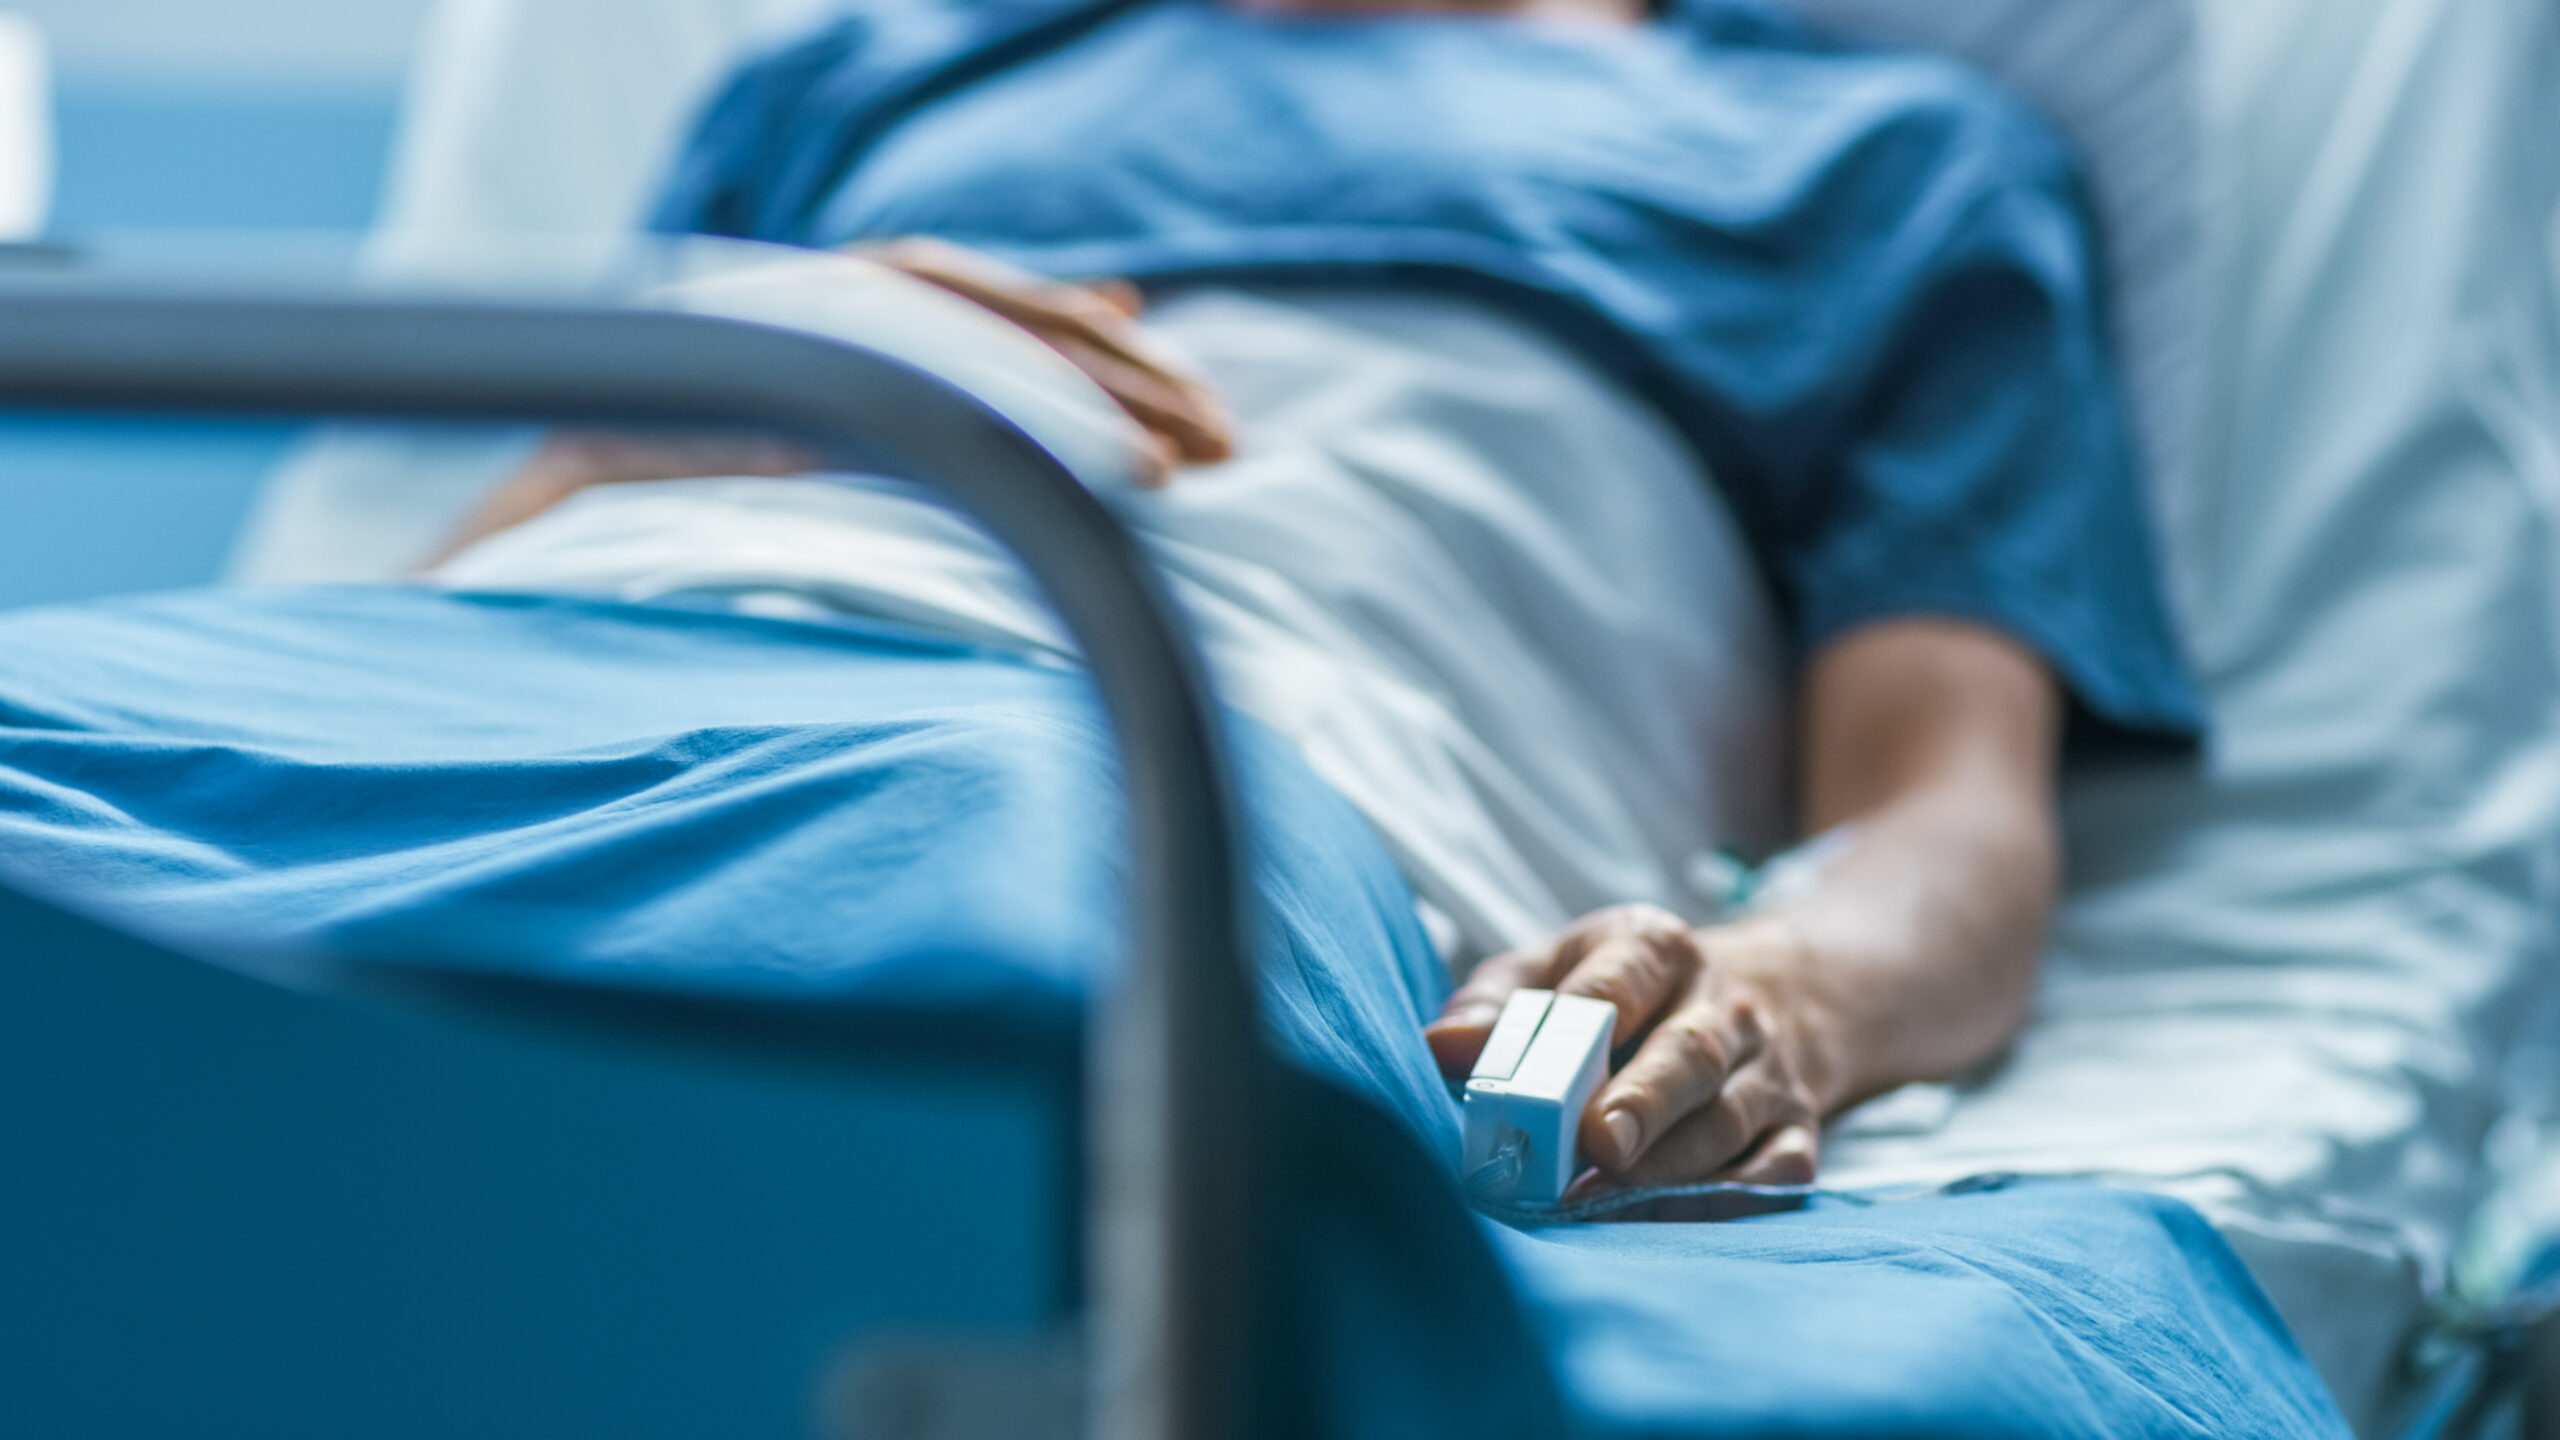 Study Finds 1 in 20 Are Harmed By Medical Errors In Hospital Settings